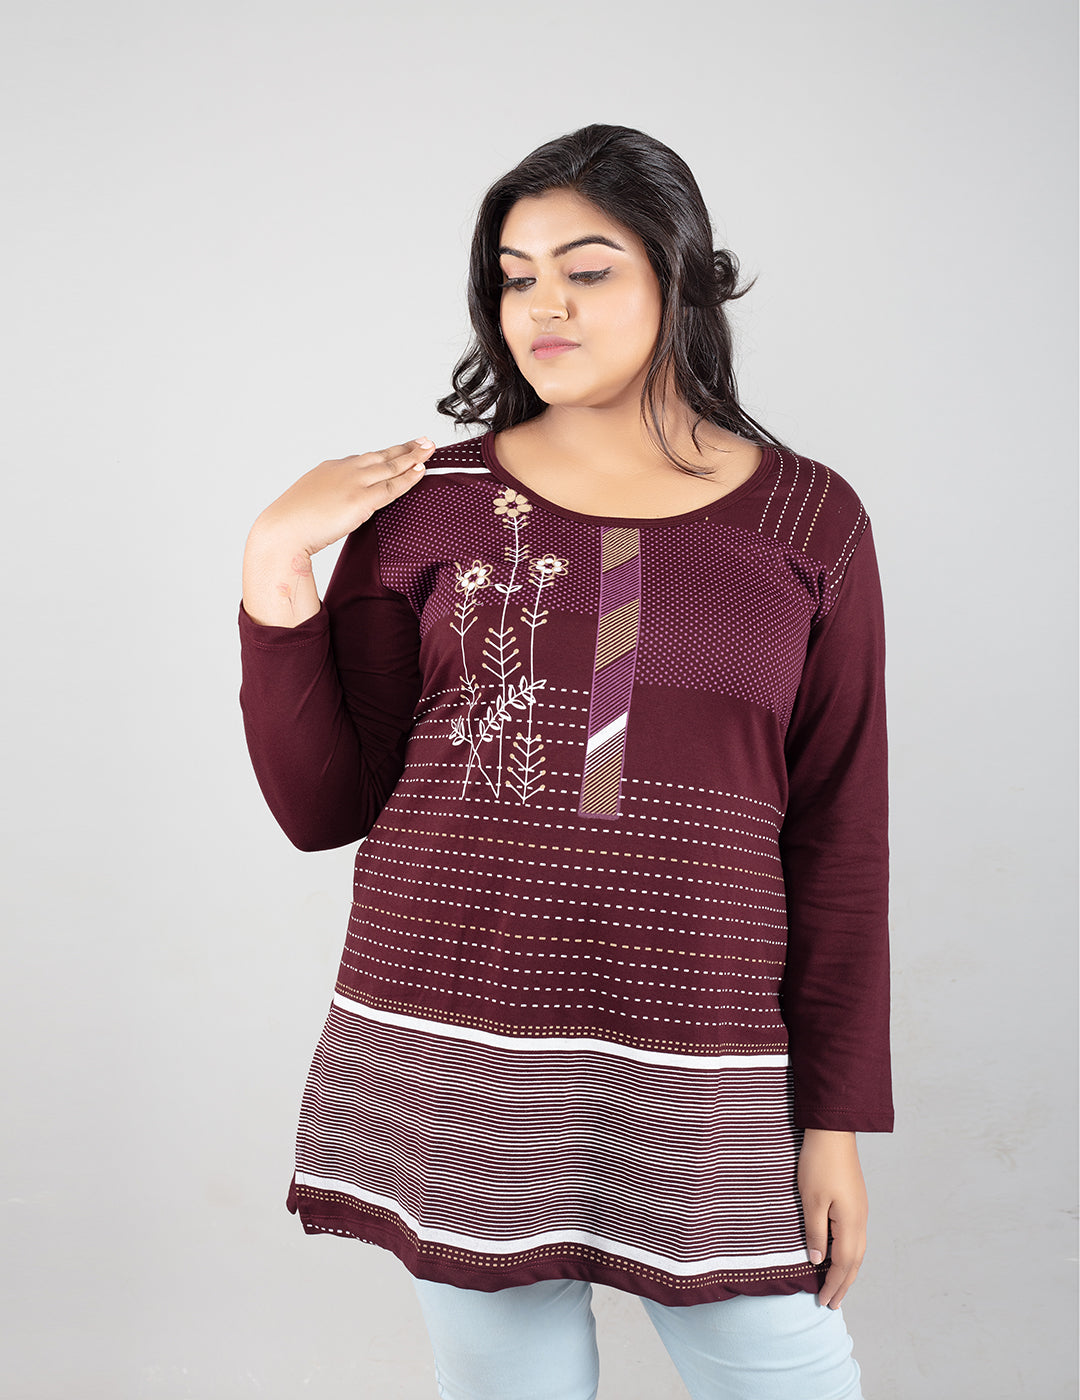 Buy Comfortable Full Sleeves Plus Size Cotton Print Long Top for